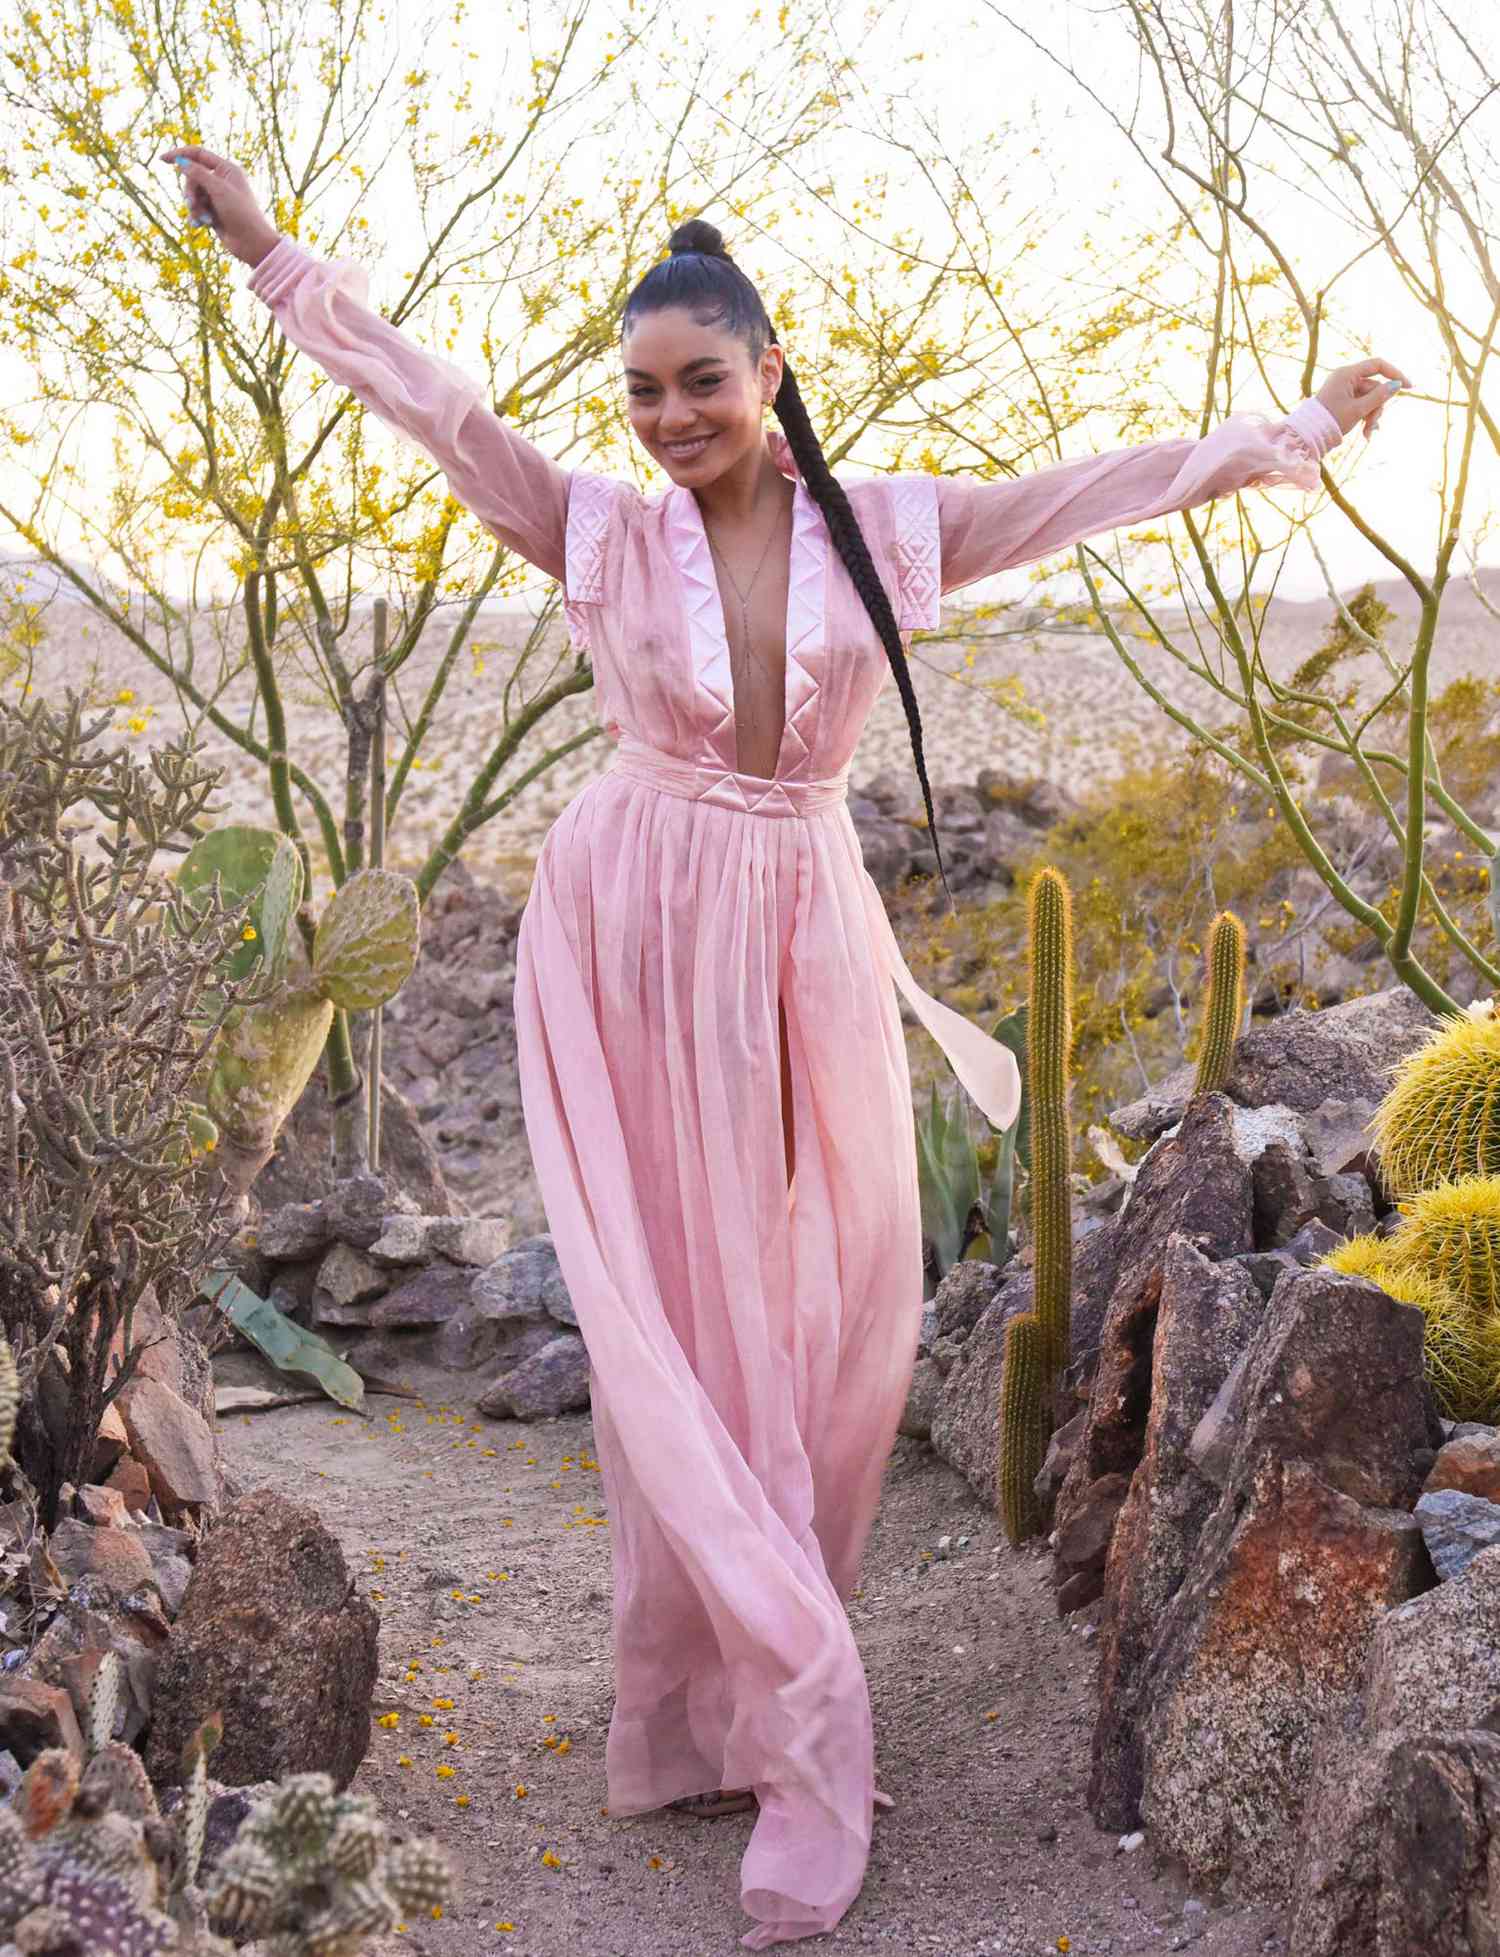 Vanessa Hudgens attends Vanessa Hudgens And Oliver Trevena Host 'Caliwater Escape' In Joshua Tree at the Mojave Moon Ranch to celebrate their new cactus water beverage Presented By Outdoorsy on April 30, 2021 in Joshua Tree